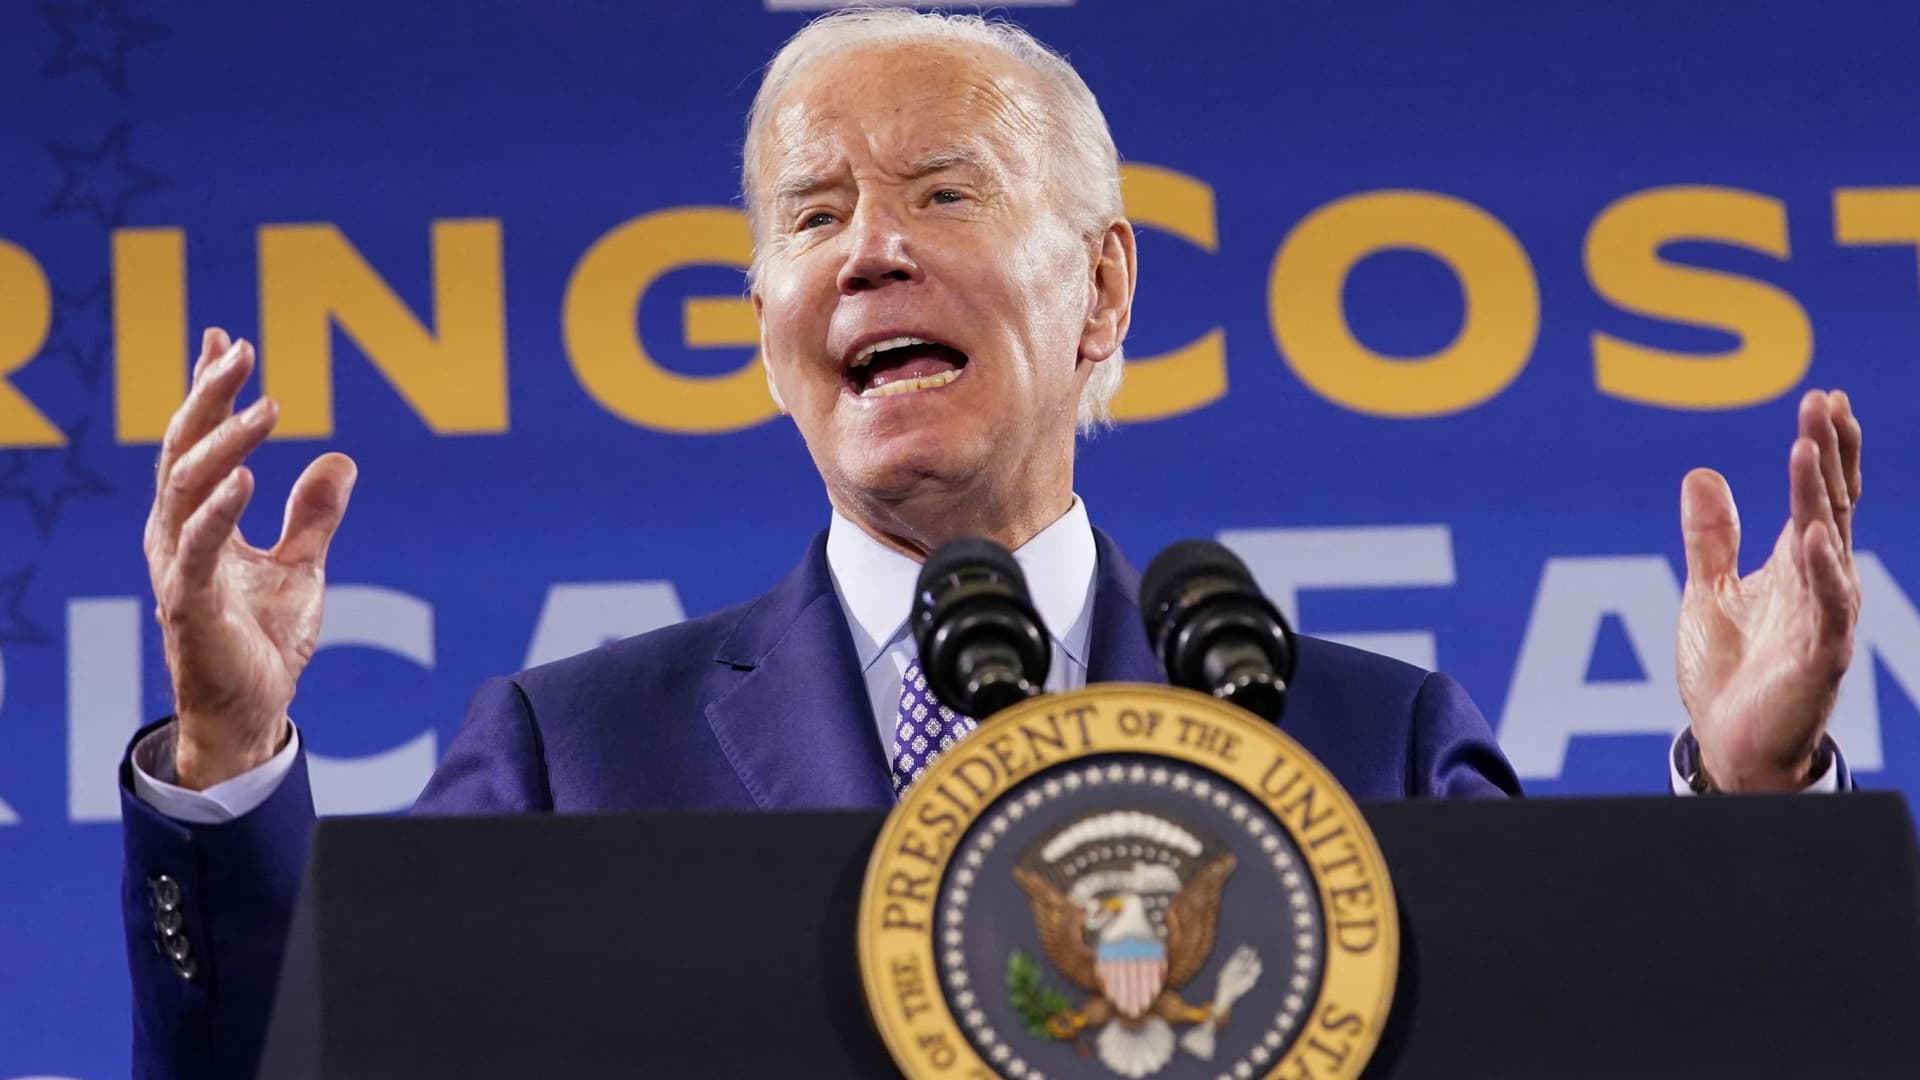 The EU says it is seriously concerned about Biden’s inflation reduction law